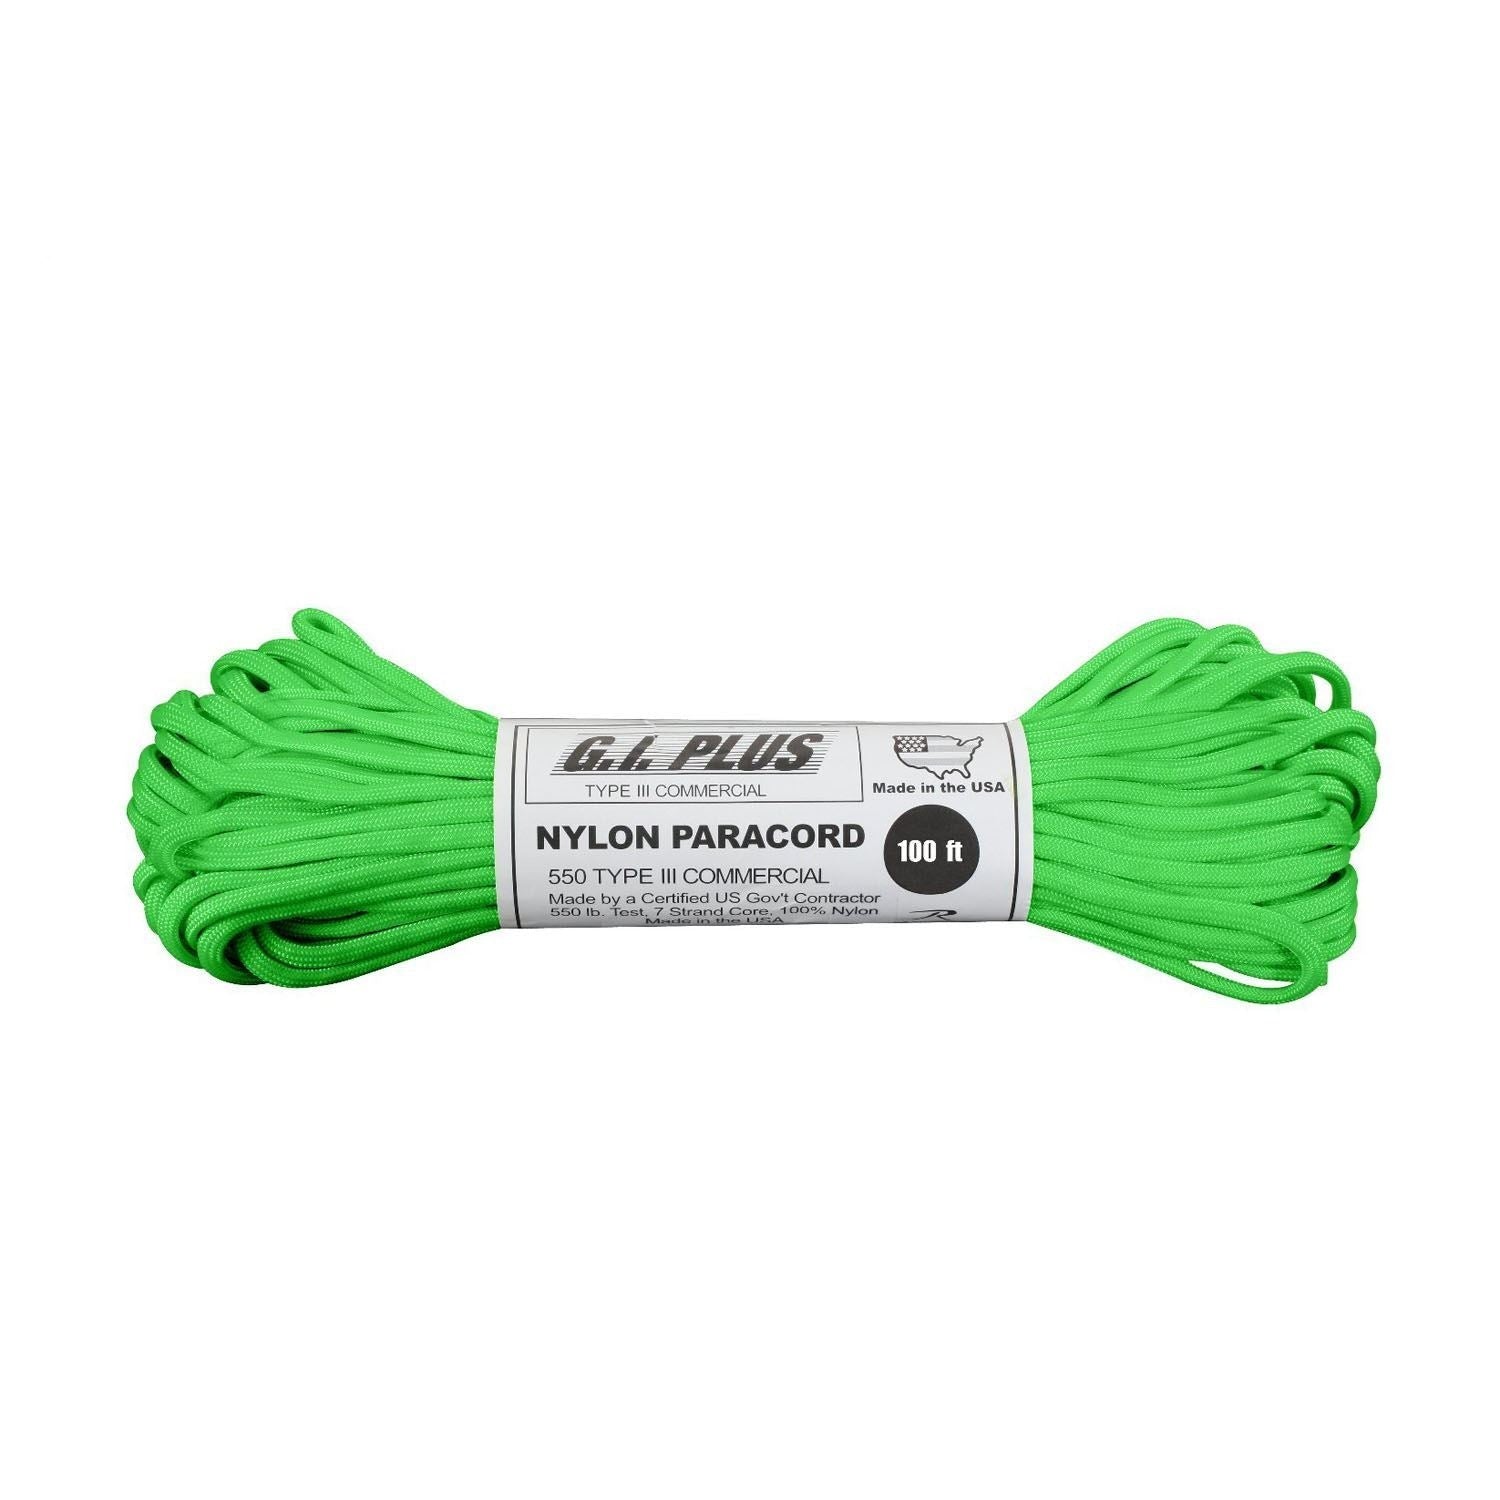 Nylon Paracord - Safety Green 100ft Type III 550 lb.  (5 Per Pack)